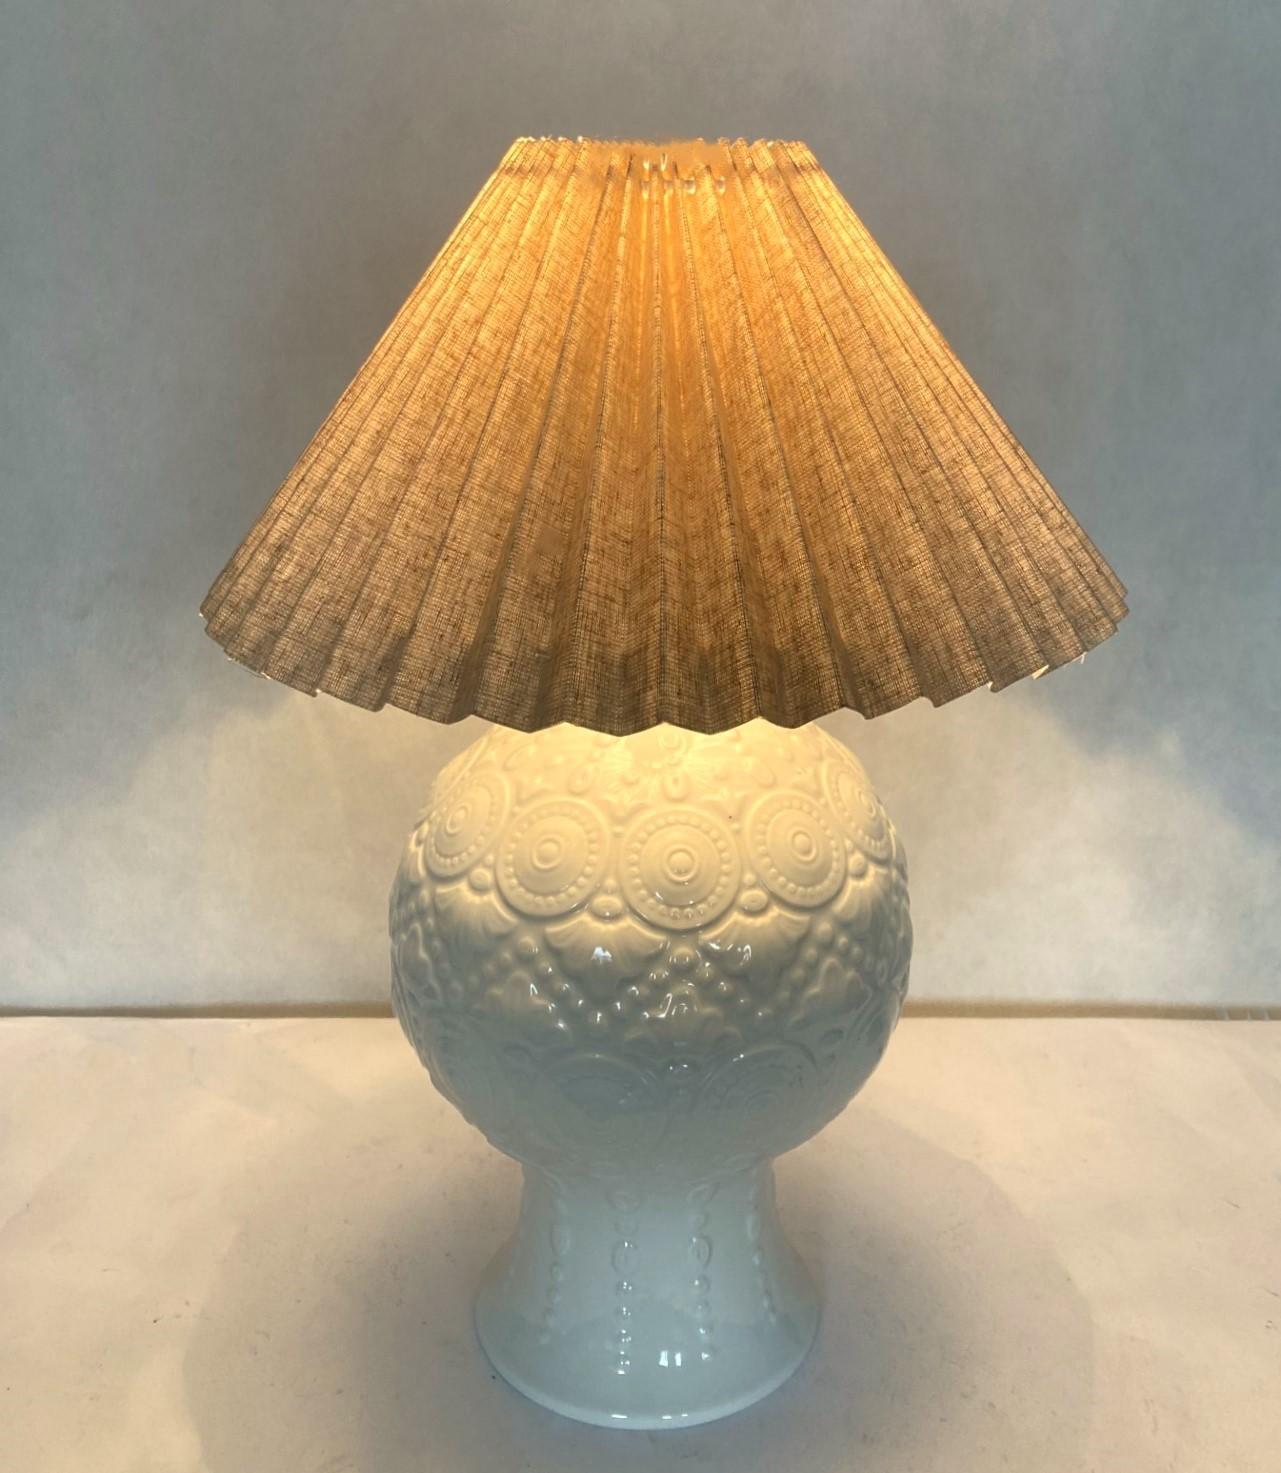 Spanish Hand-Crafted White Glazed Ceramic Table Lamp Textured Relief, 1970s  For Sale 3